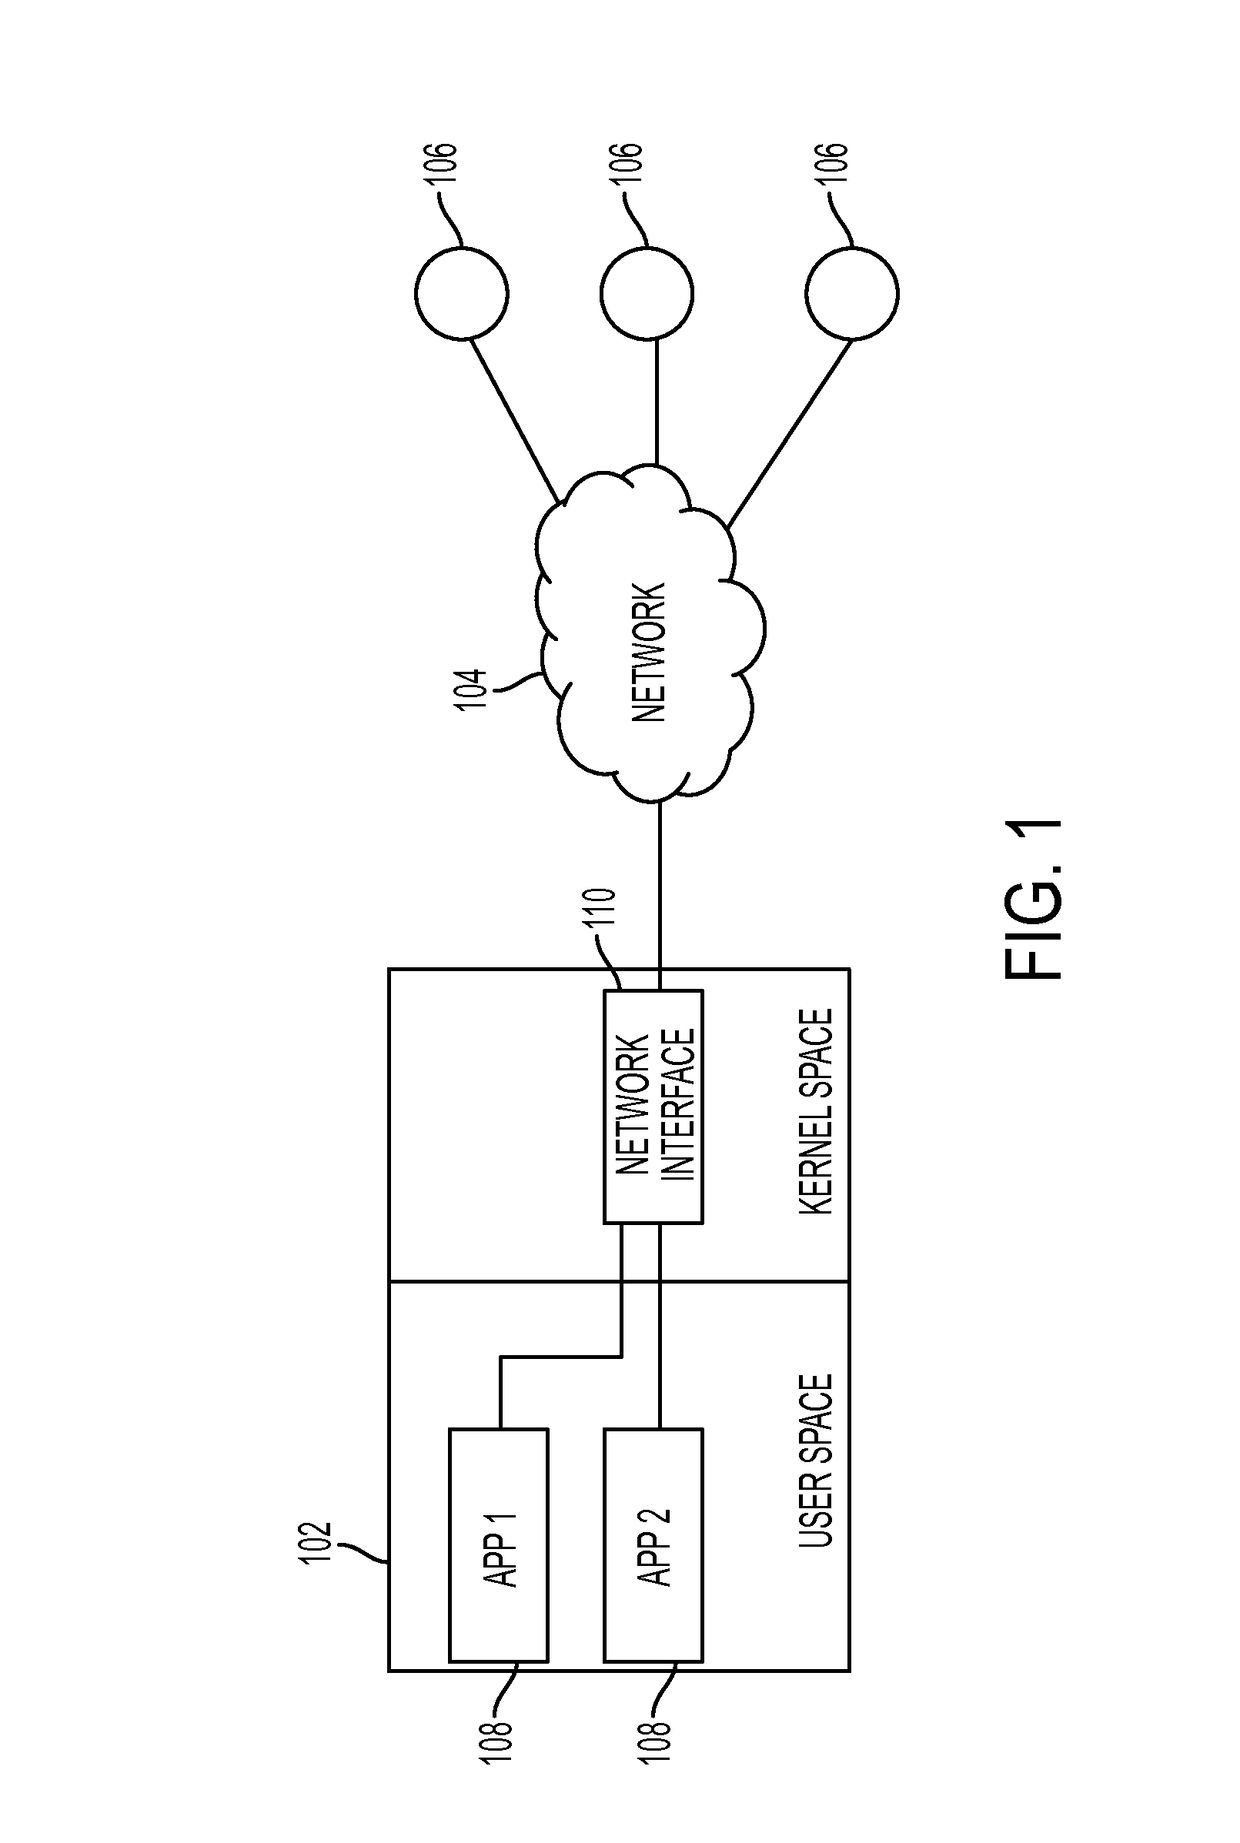 Mobile device-based intrusion prevention system